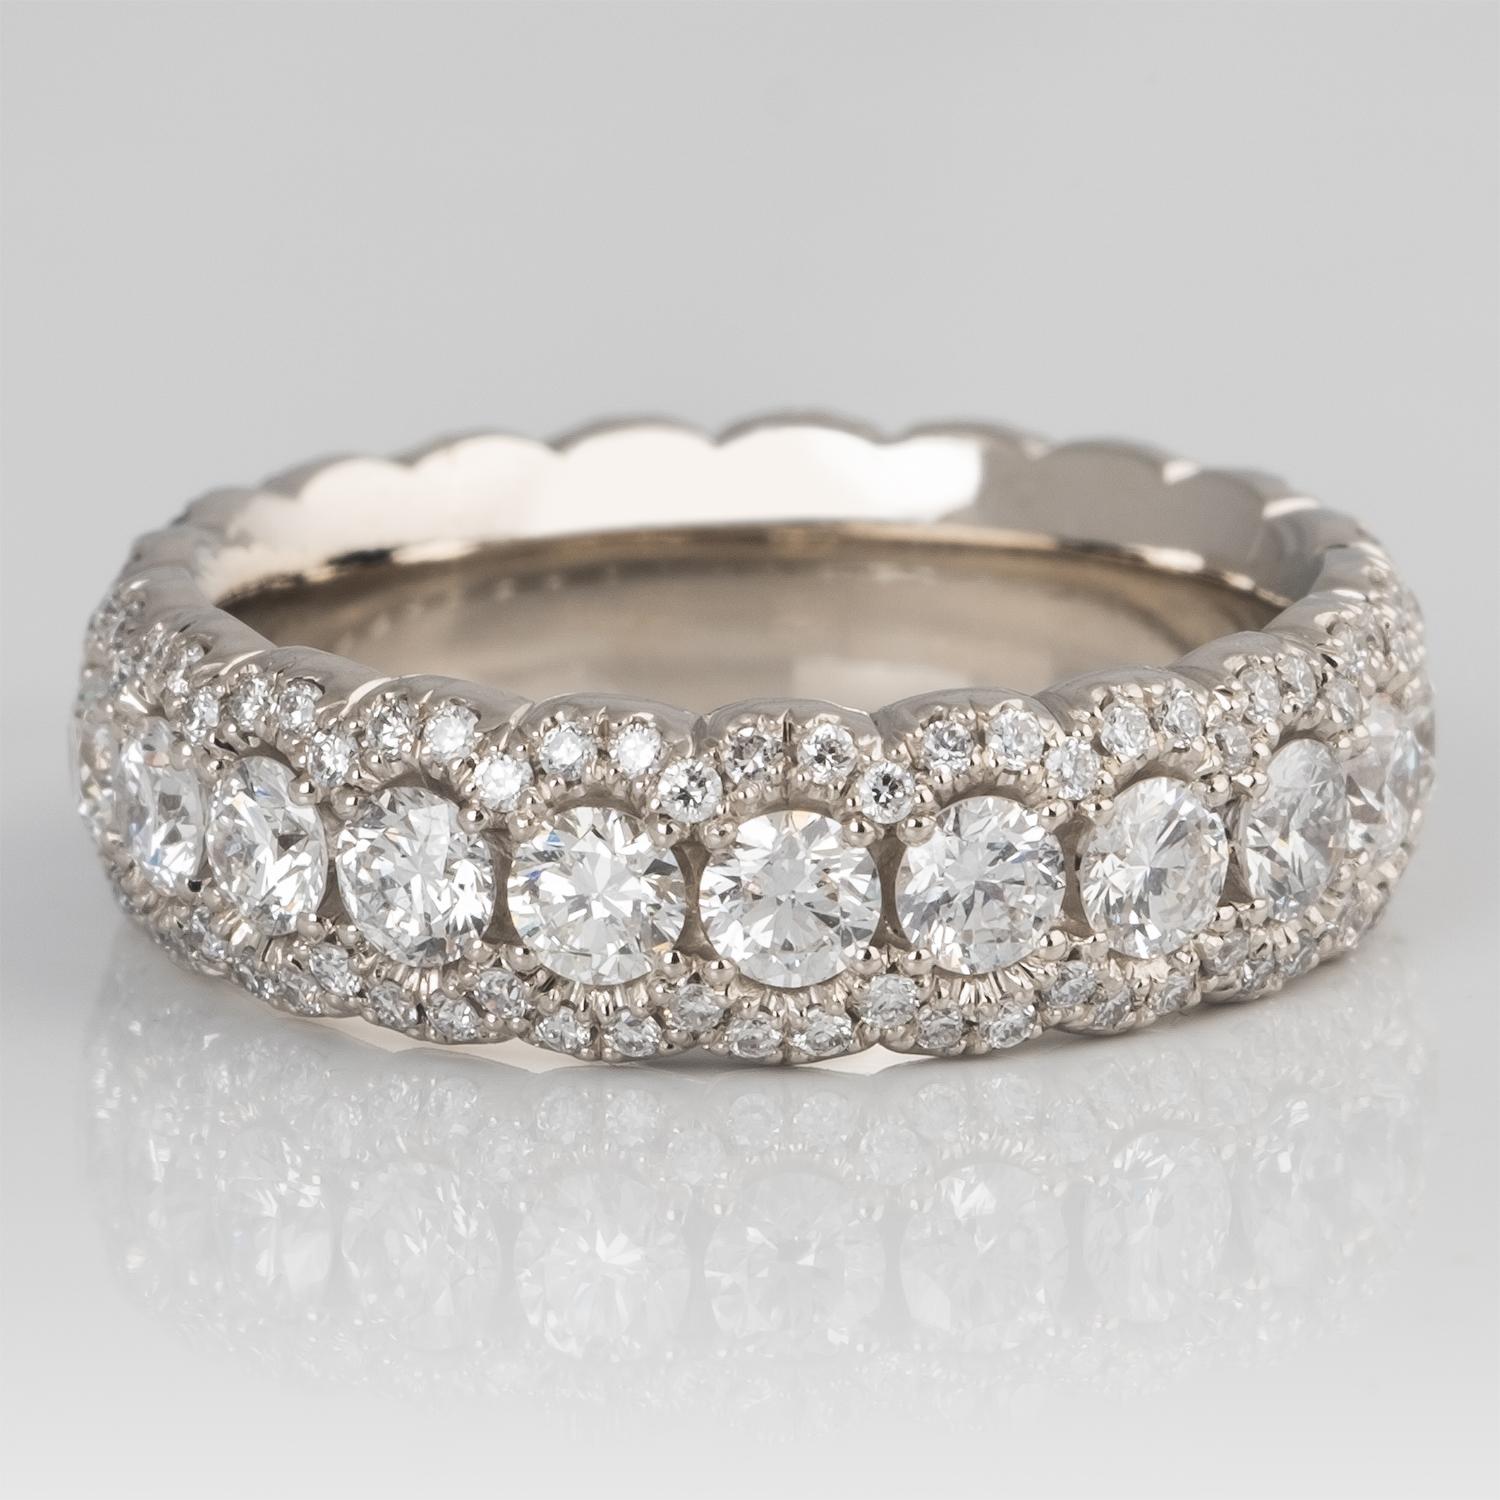 1.57 carats Diamond 14 Karat White Gold Scalloped Eternity Ring In New Condition For Sale In Niagara On The Lake, ON